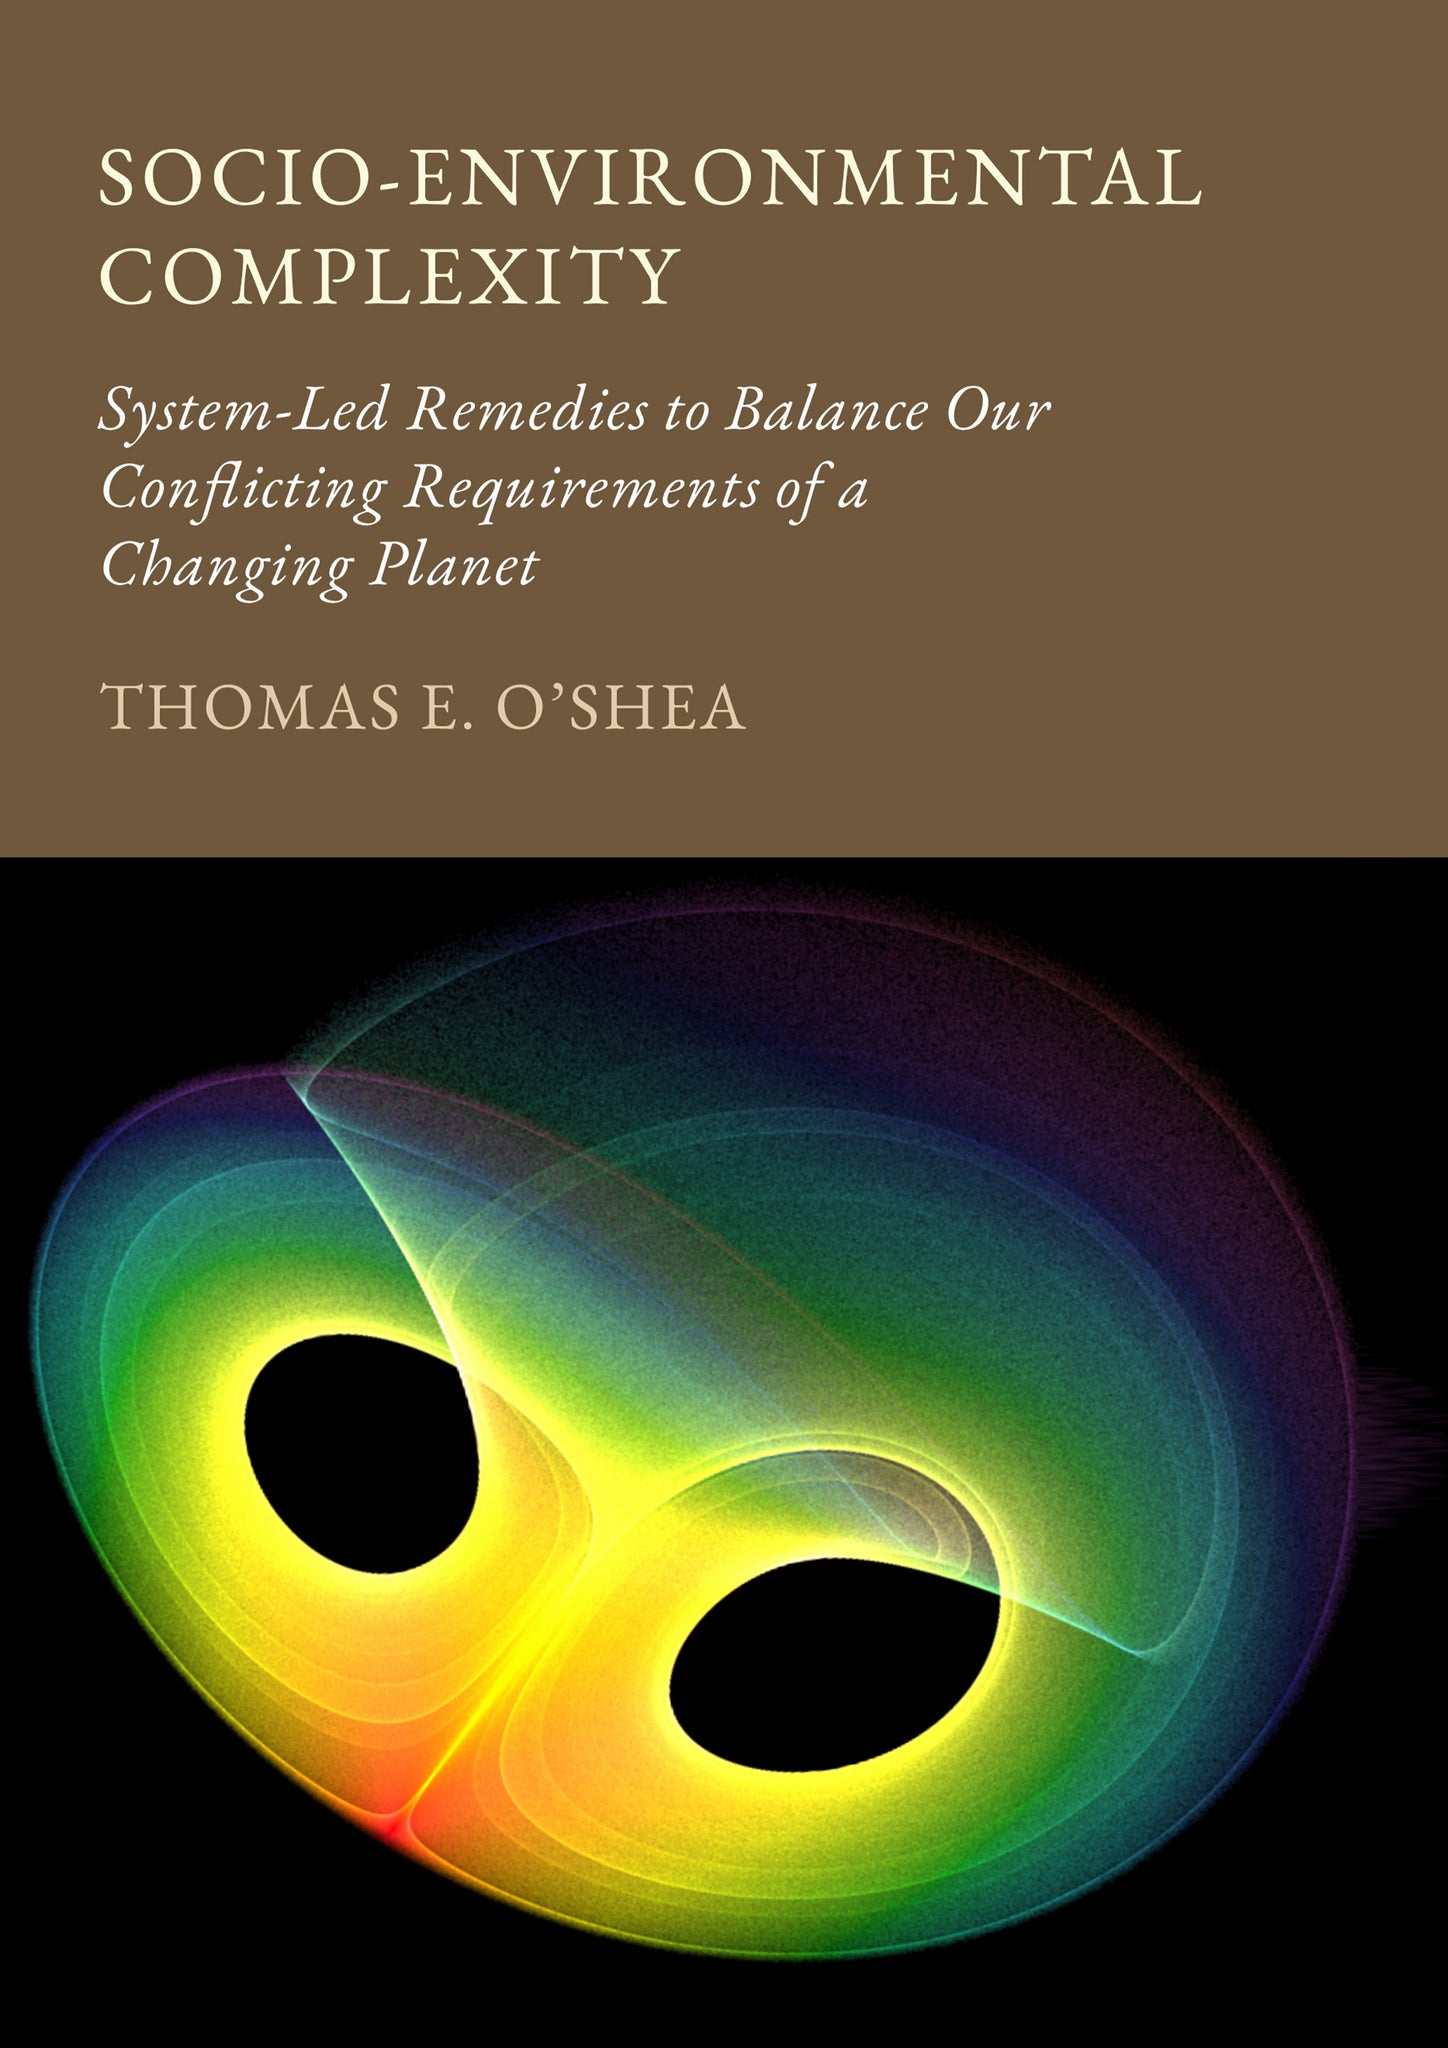 Socio-Environmental Complexity: System-Led Remedies to Balance Our Conflicting Requirements of a Changing Planet